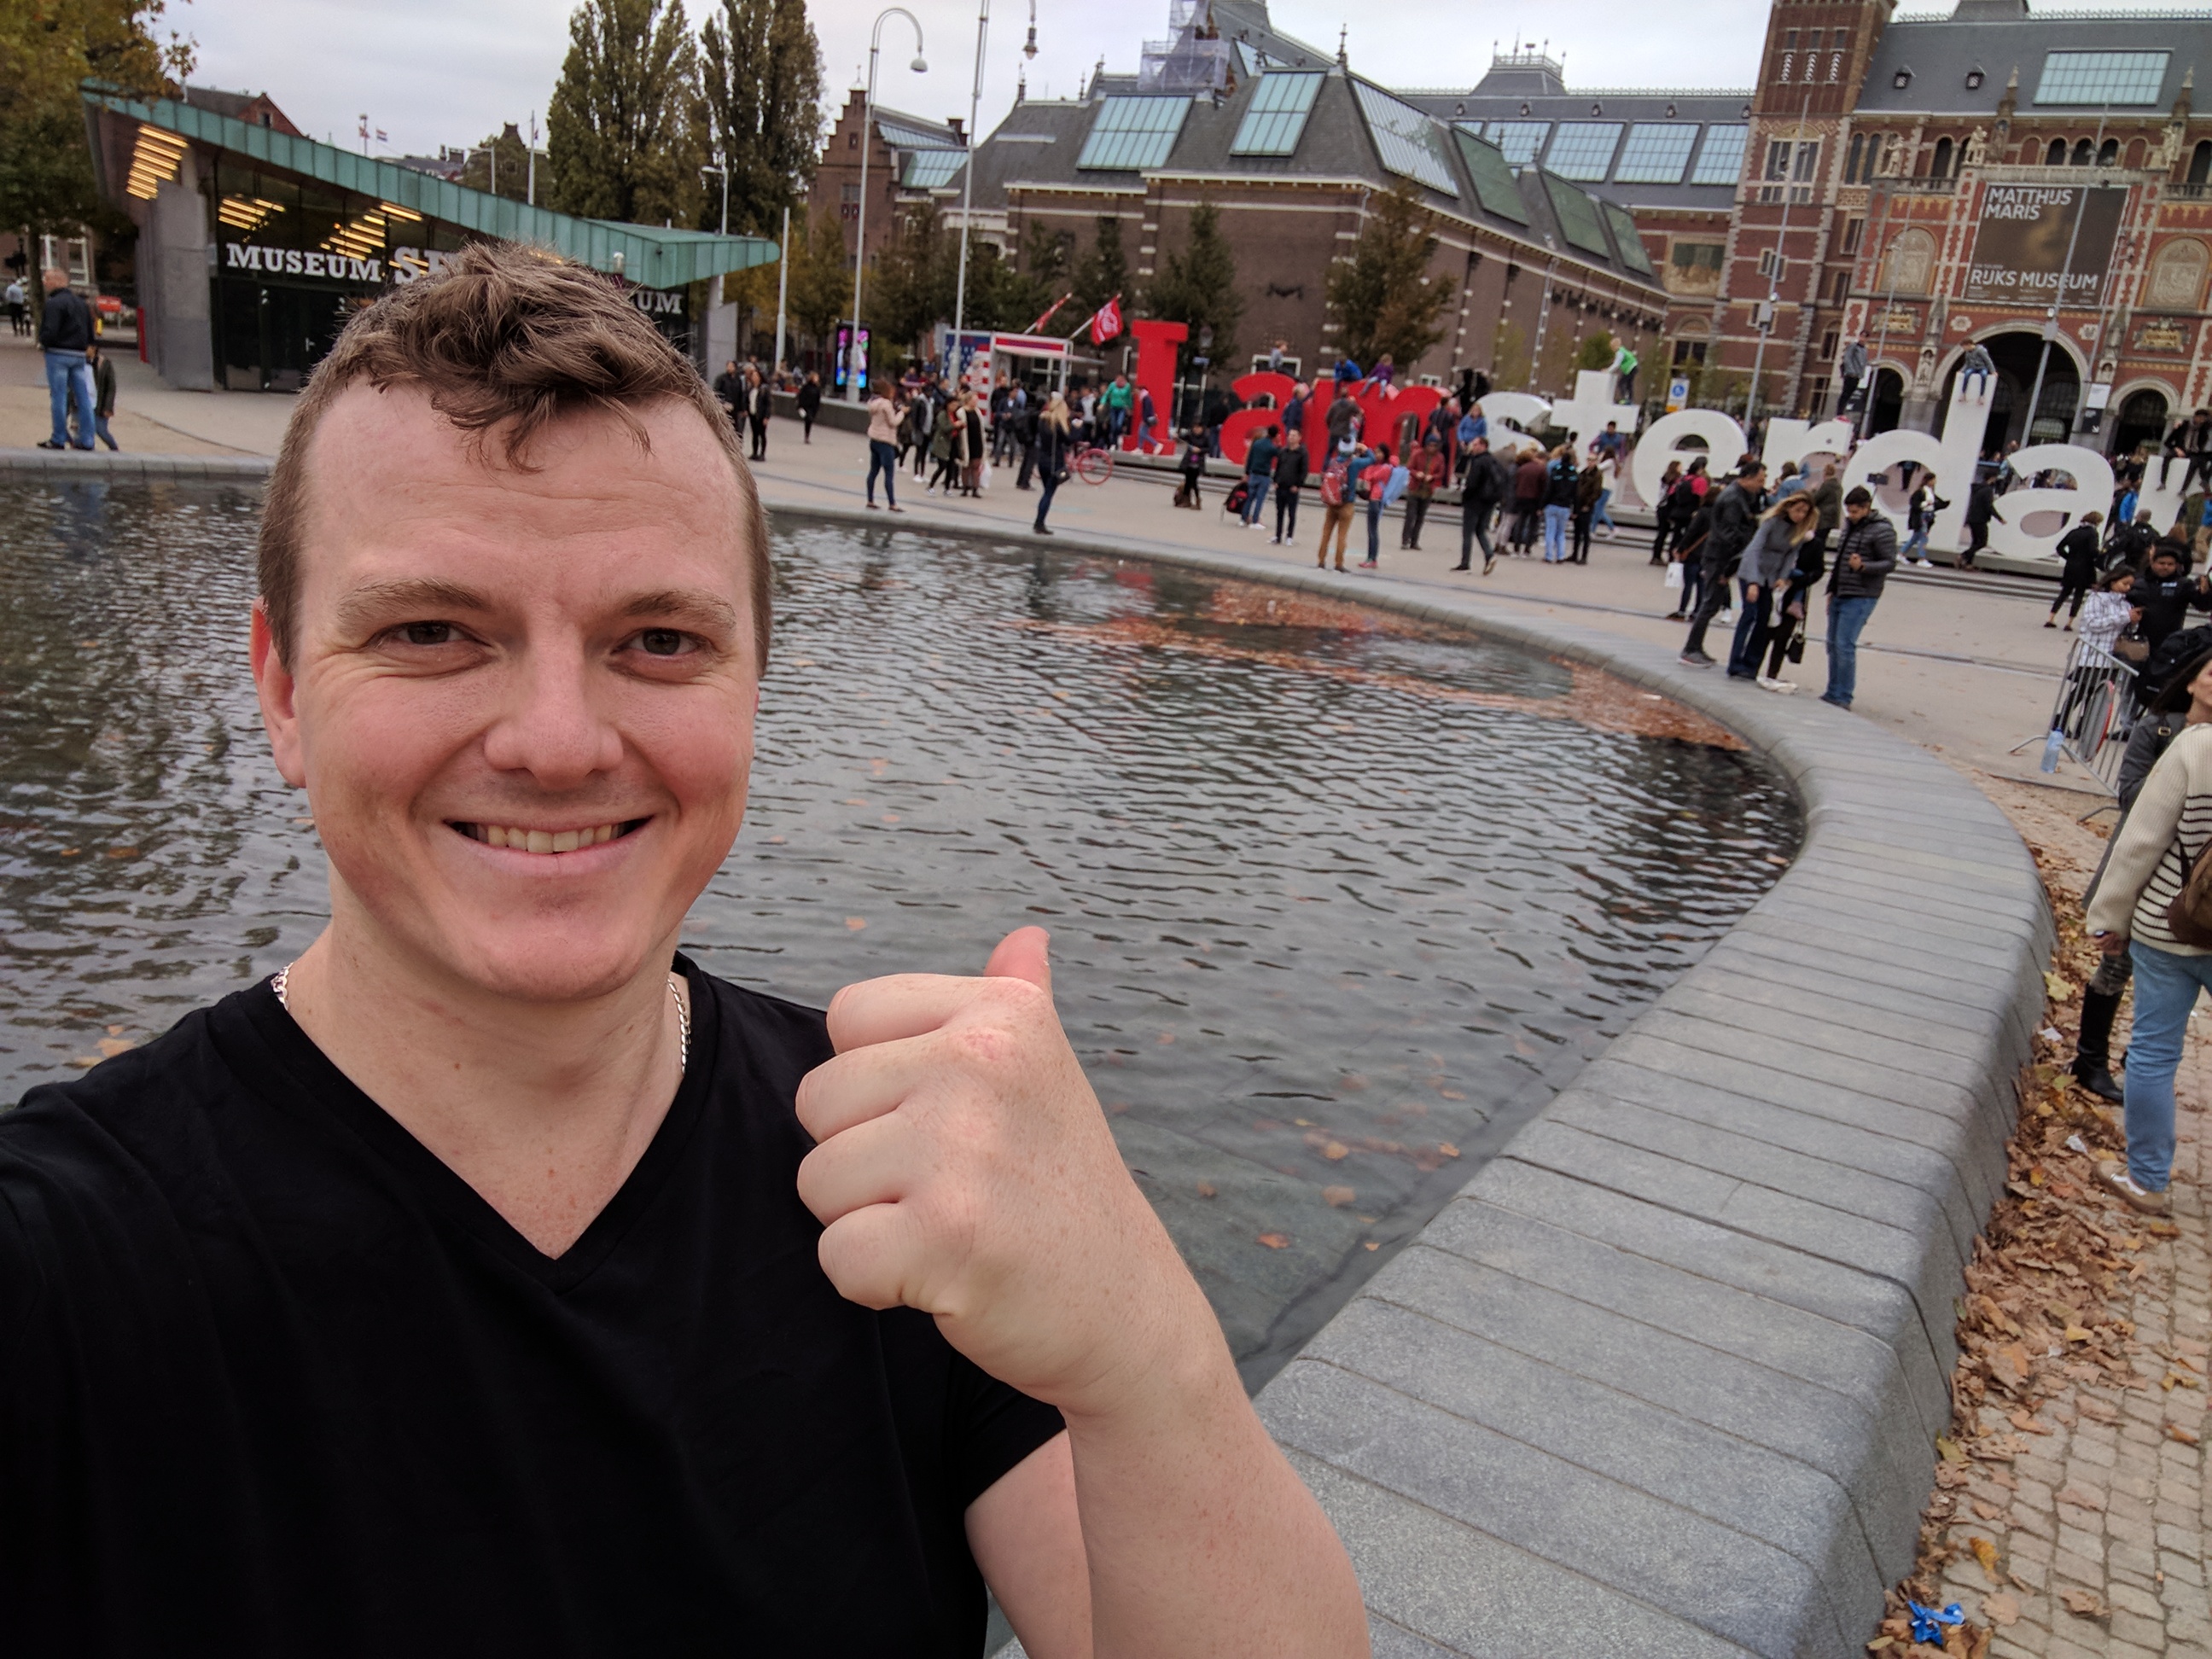 Me in front of a pond in front of the I Amsterdam sign in front of the Rijks Museum. There's people everywhere.